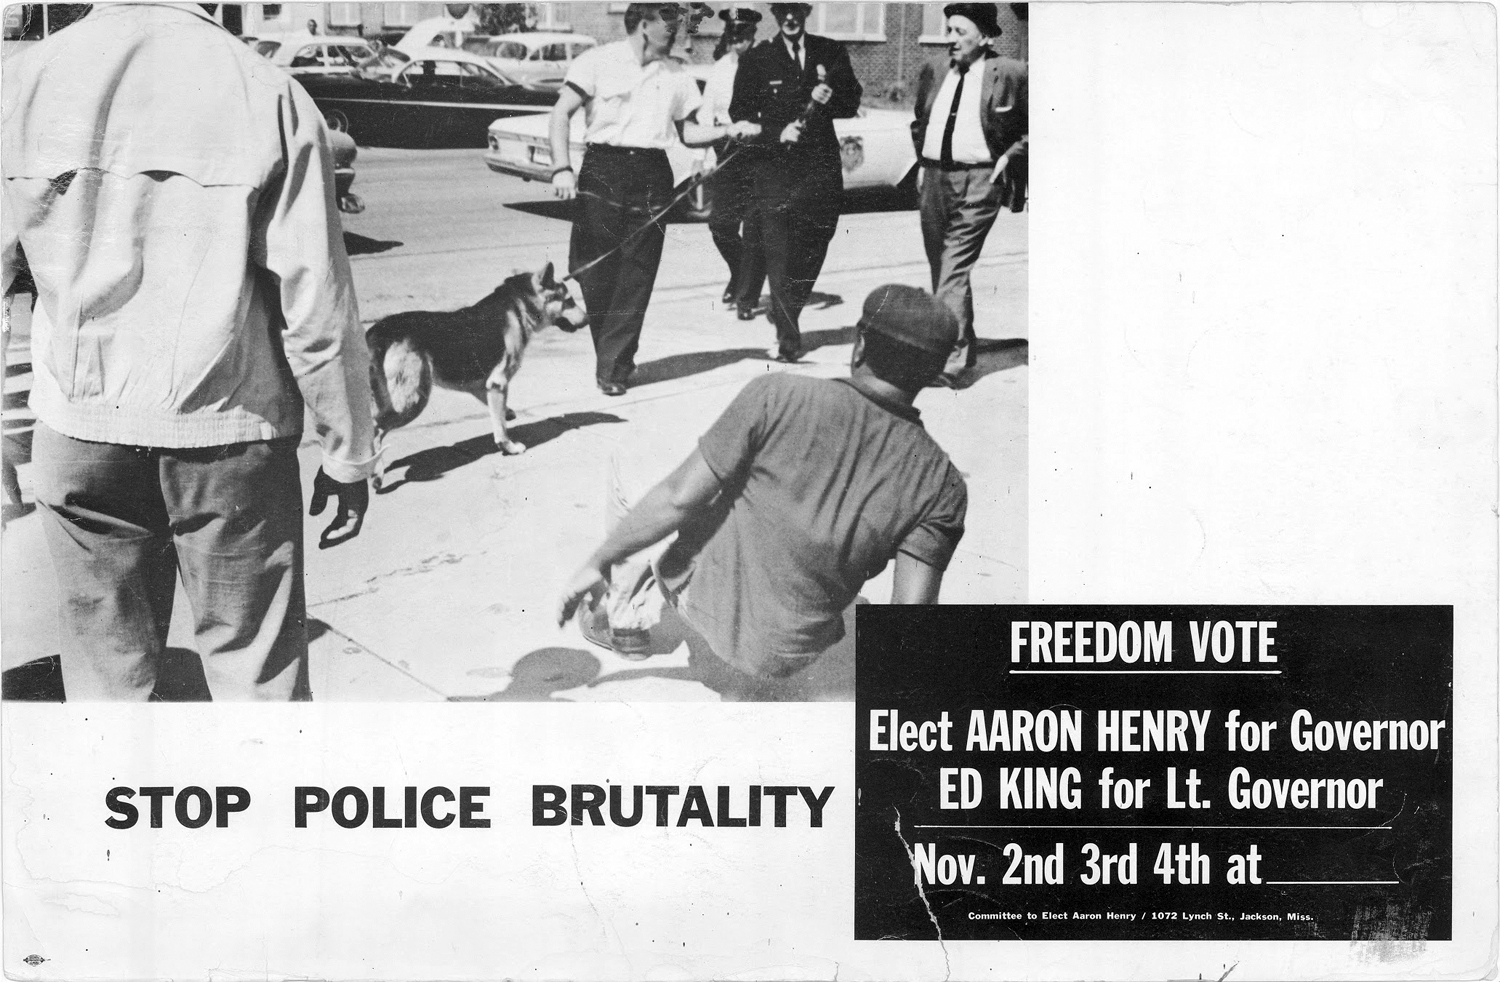 Blocky text says "STOP POLICE BRUTALITY," a photo depicts a police officer with a dog on a leash and a black man in the foreground, sitting on the sidewalk leaning away from the dog. Other text in a black box says "Freedom Vote: Elect Aaron Henry for Governor, Ed King for Lt. Governor."